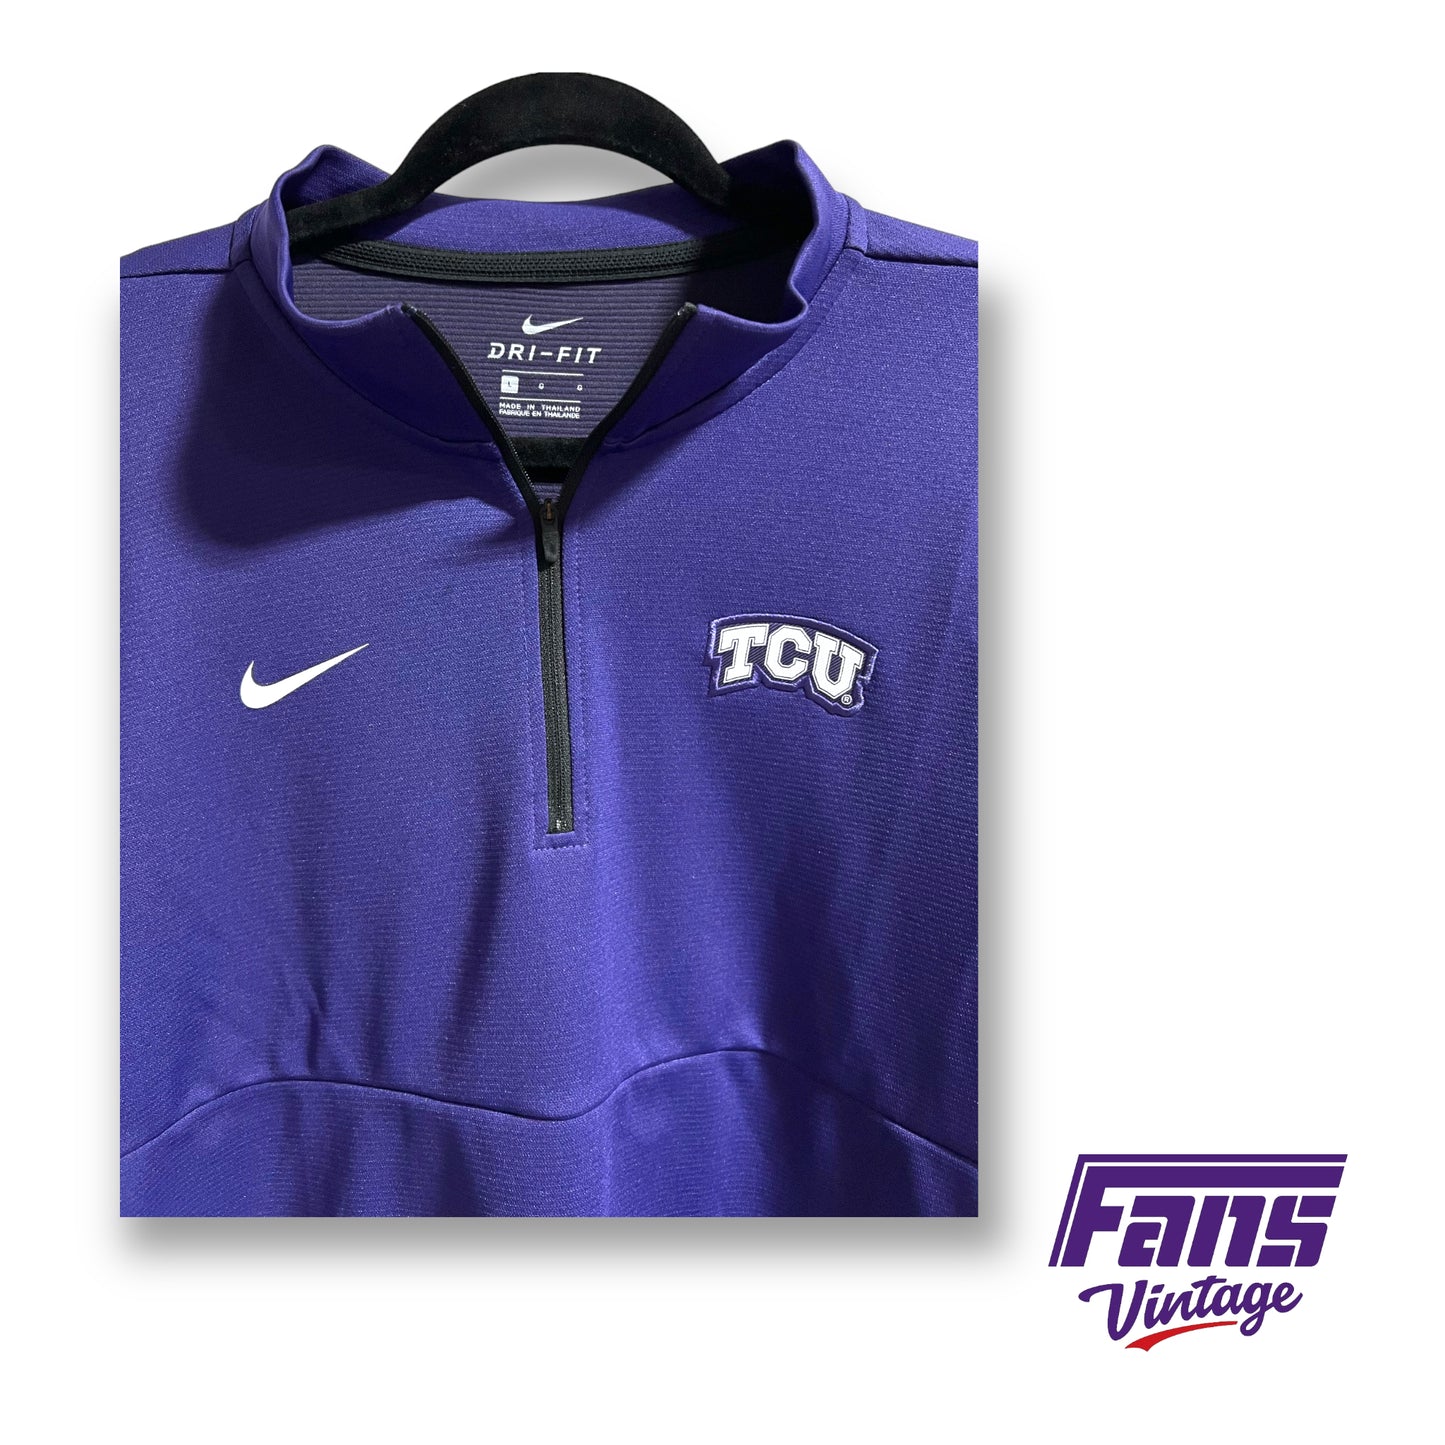 Nike TCU team issued quarter-zip pullover - Awesome details